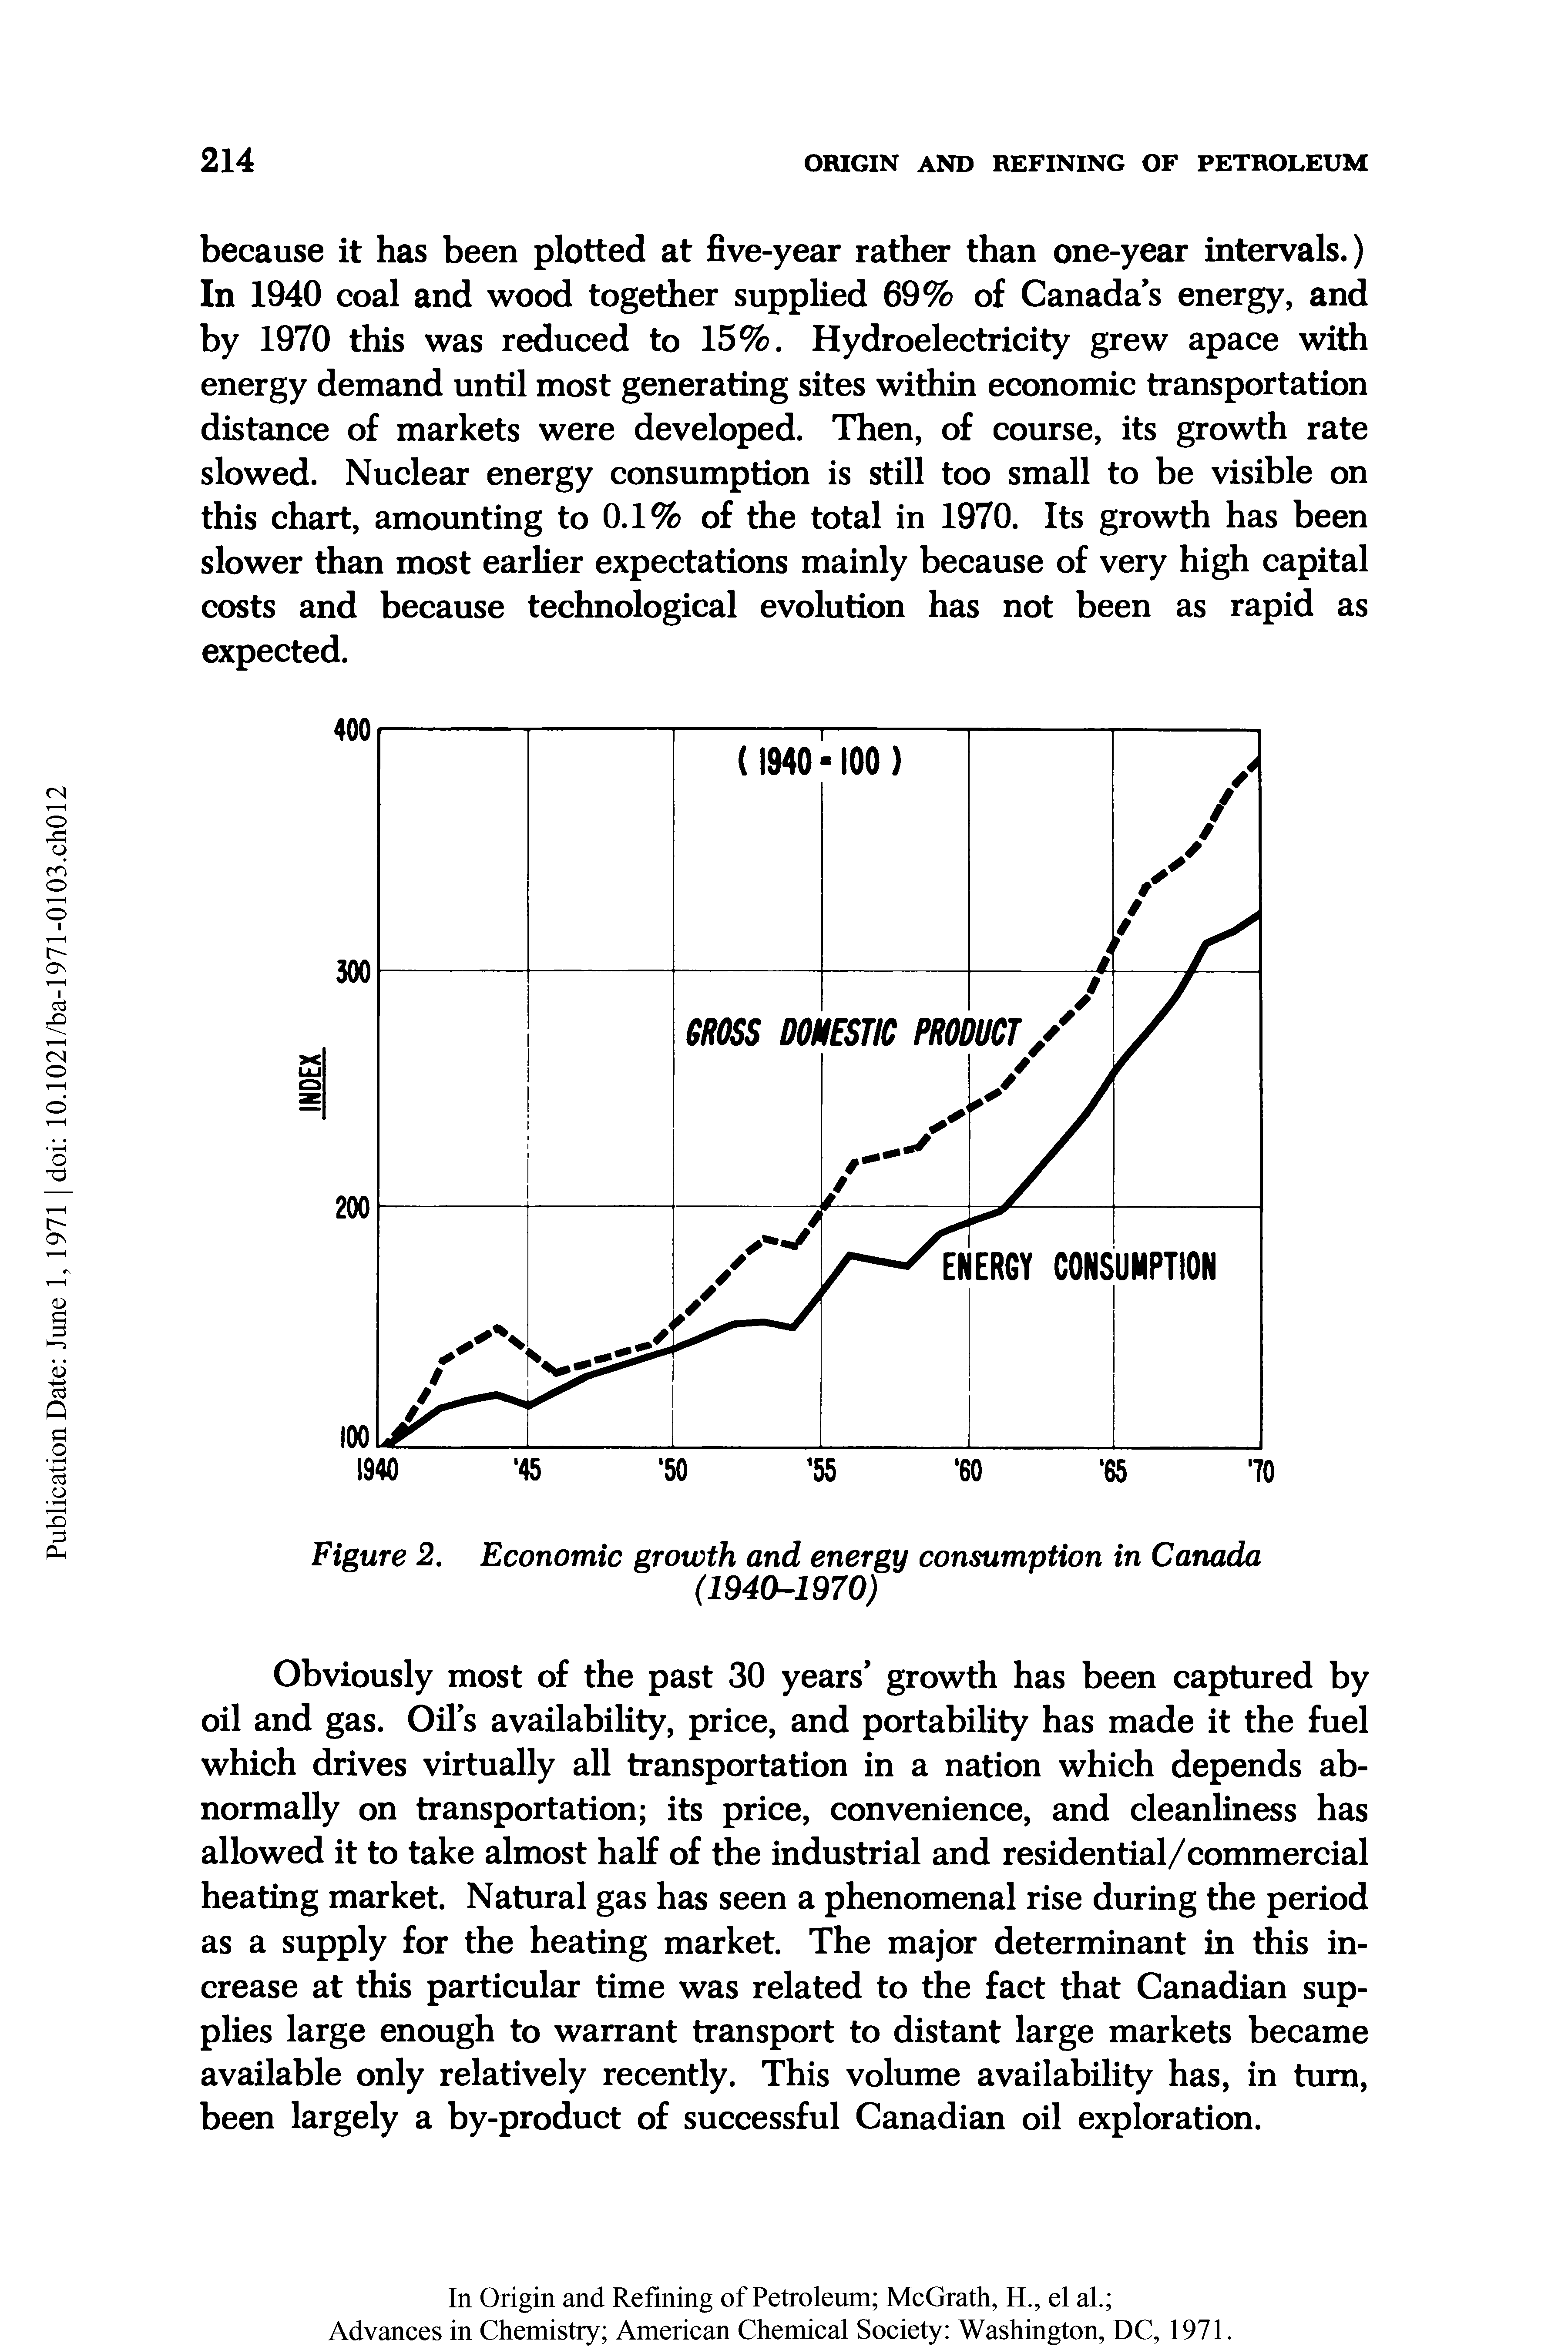 Figure 2. Economic growth and energy consumption in Canada (1940-1970)...